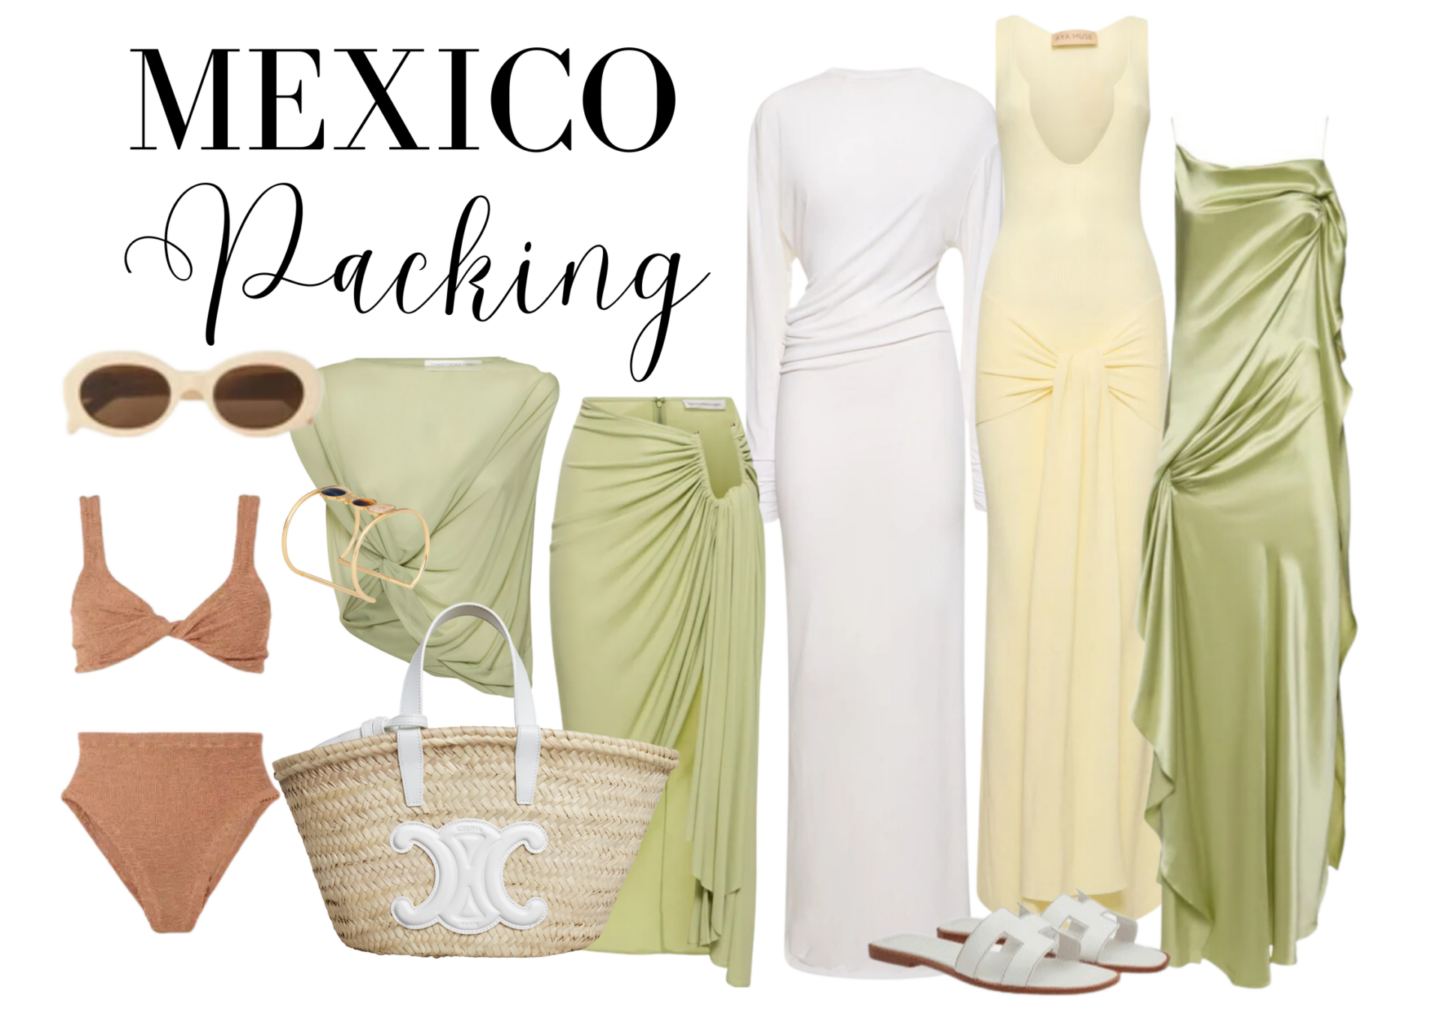 Mexico packing list